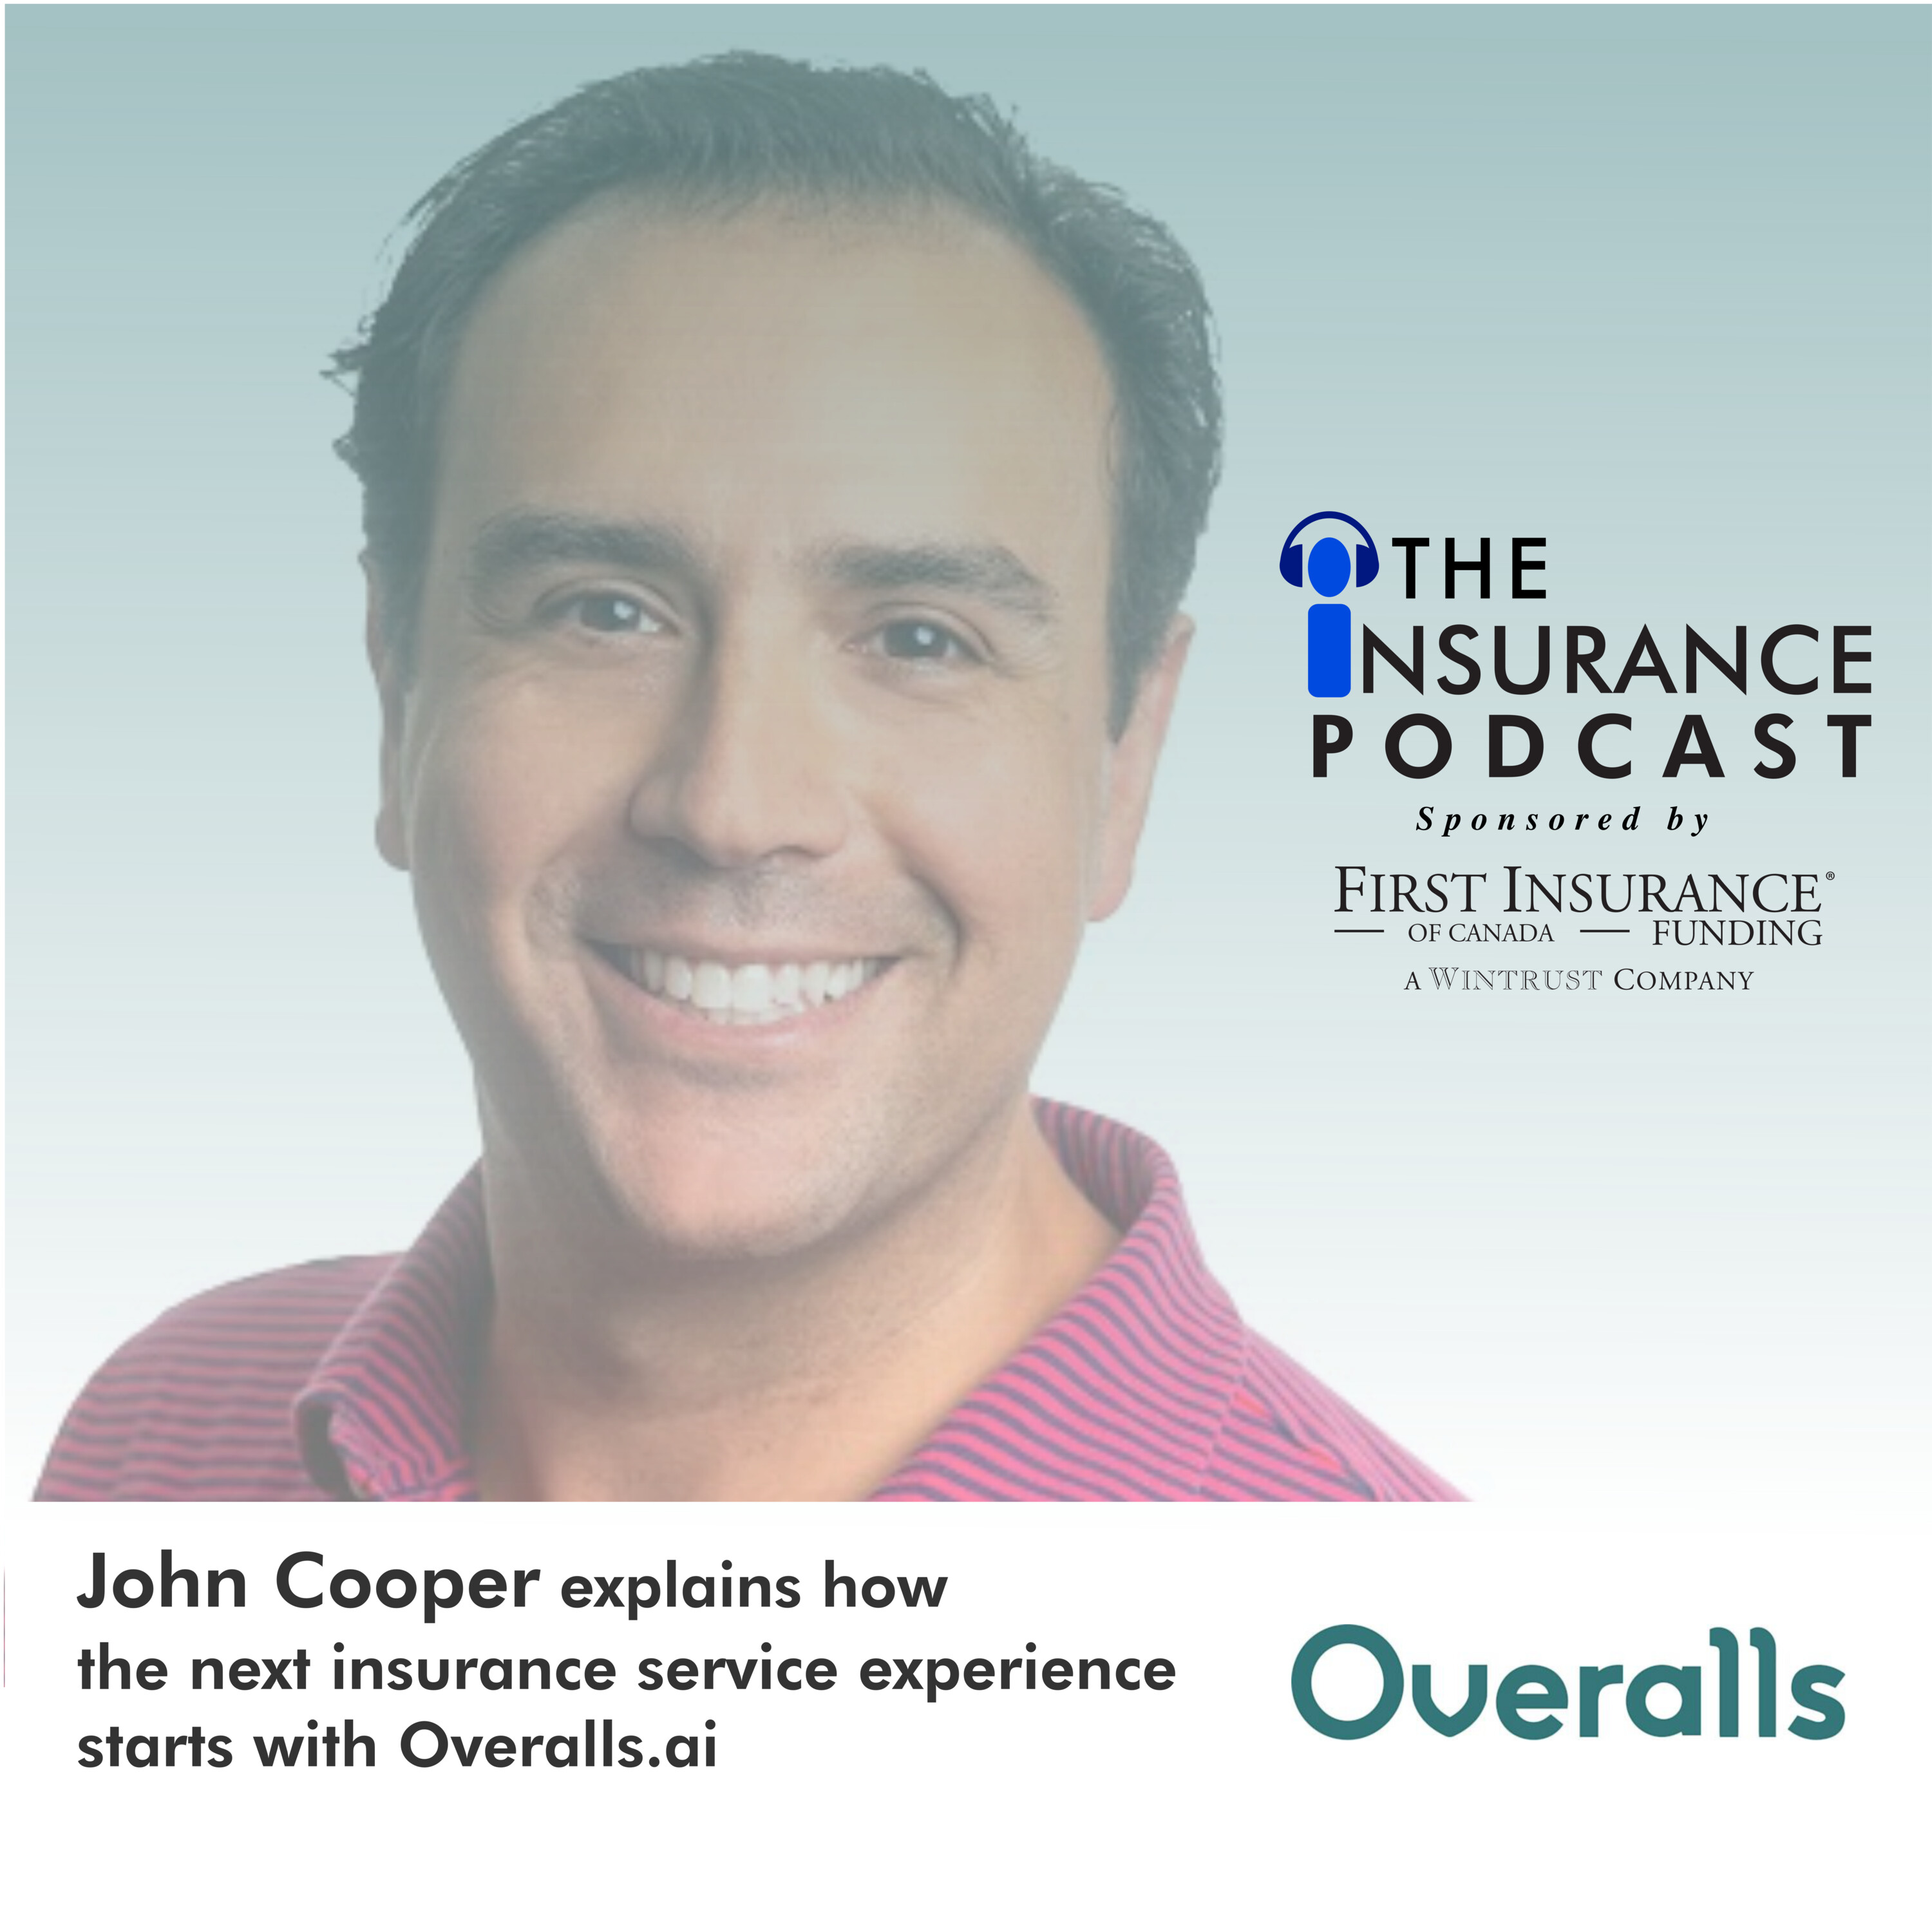 John Cooper knows Overalls are part of the next insurance customer experience